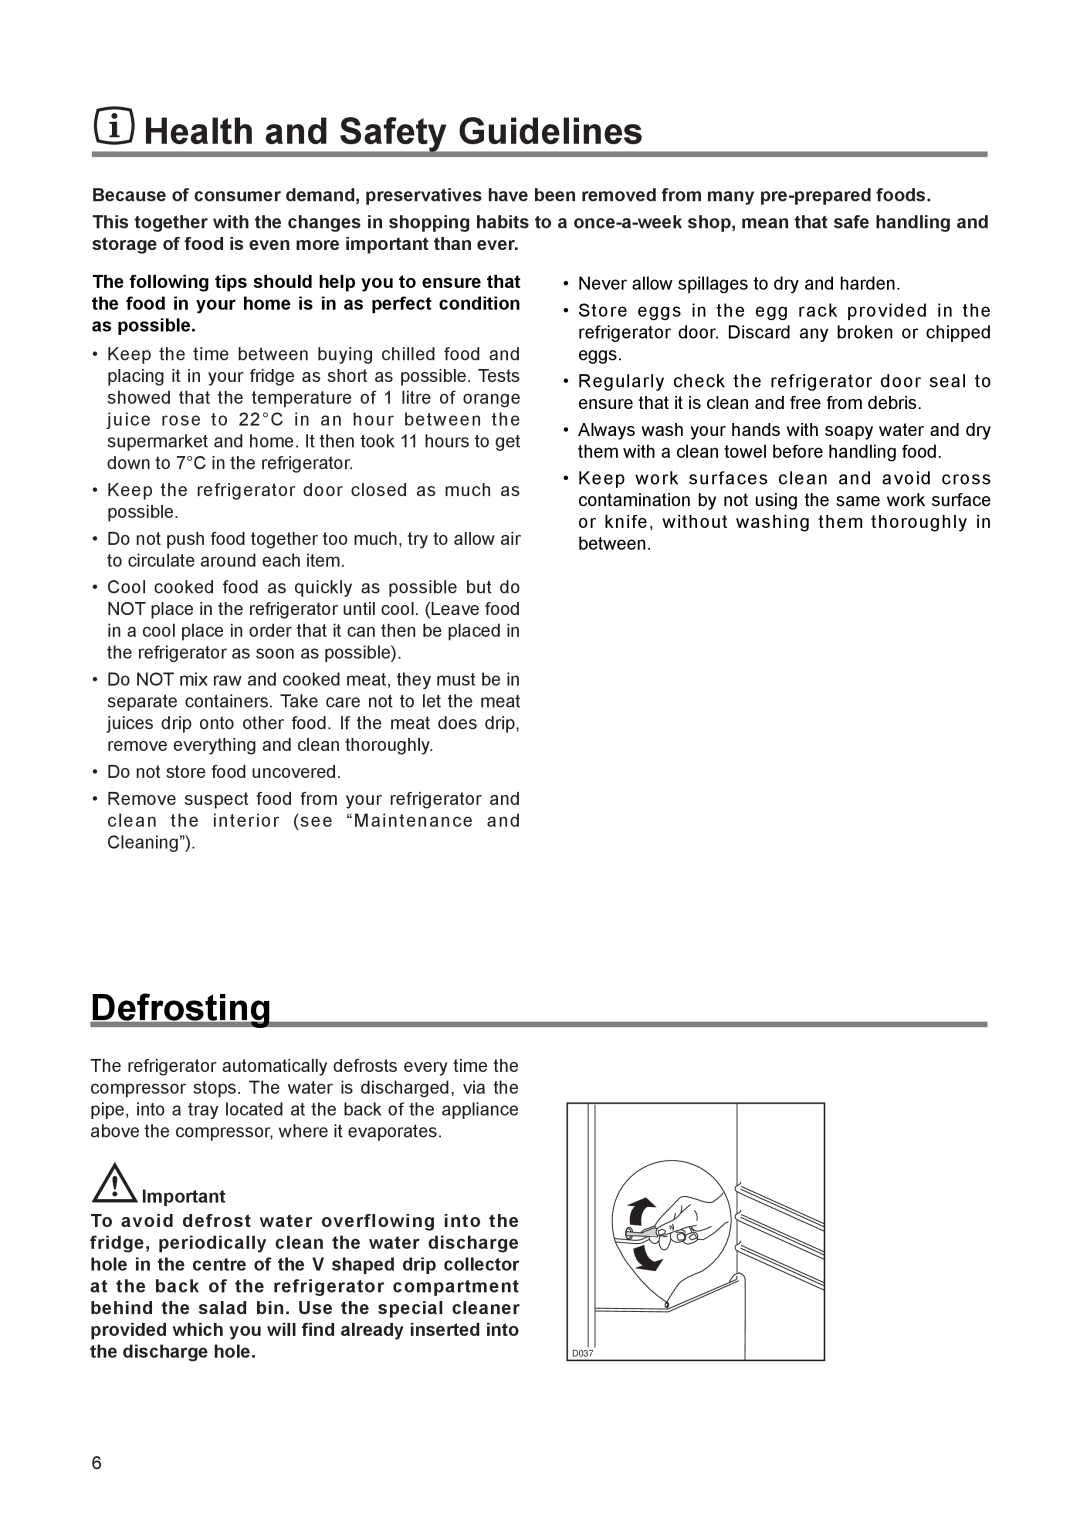 Zanussi ZI 9155, ZI 9225 manual Health and Safety Guidelines, Defrosting 